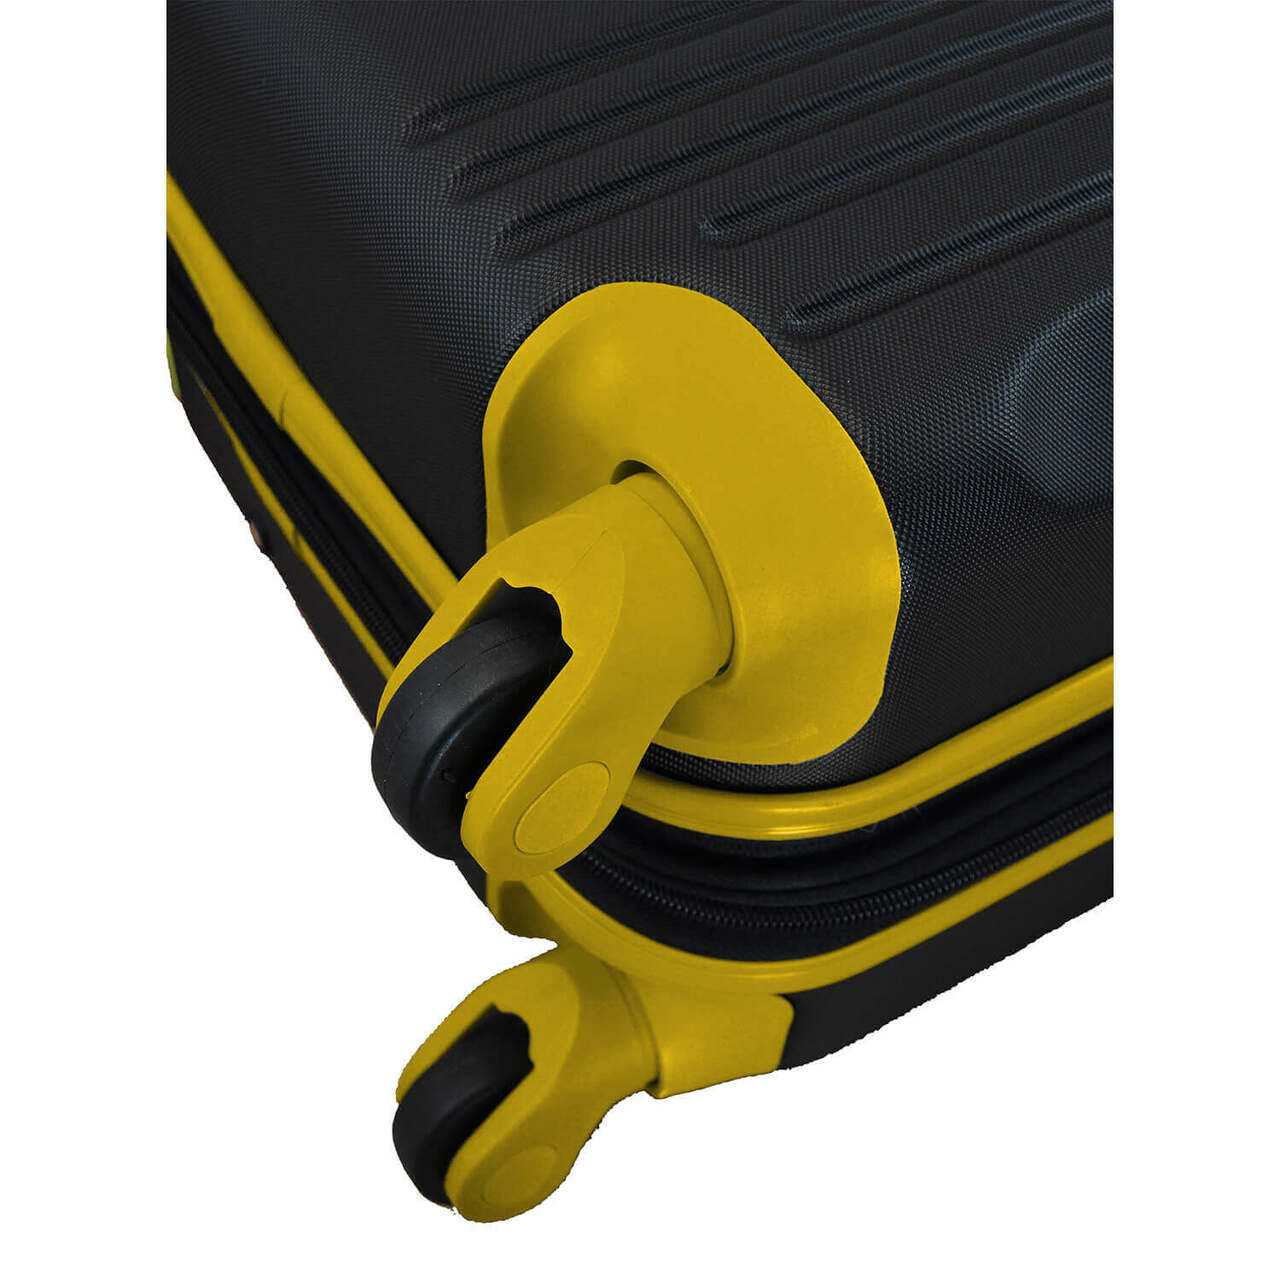 Penguins Carry On Spinner Luggage | Pittsburgh Penguins Hardcase Two-Tone Luggage Carry-on Spinner in Yellow